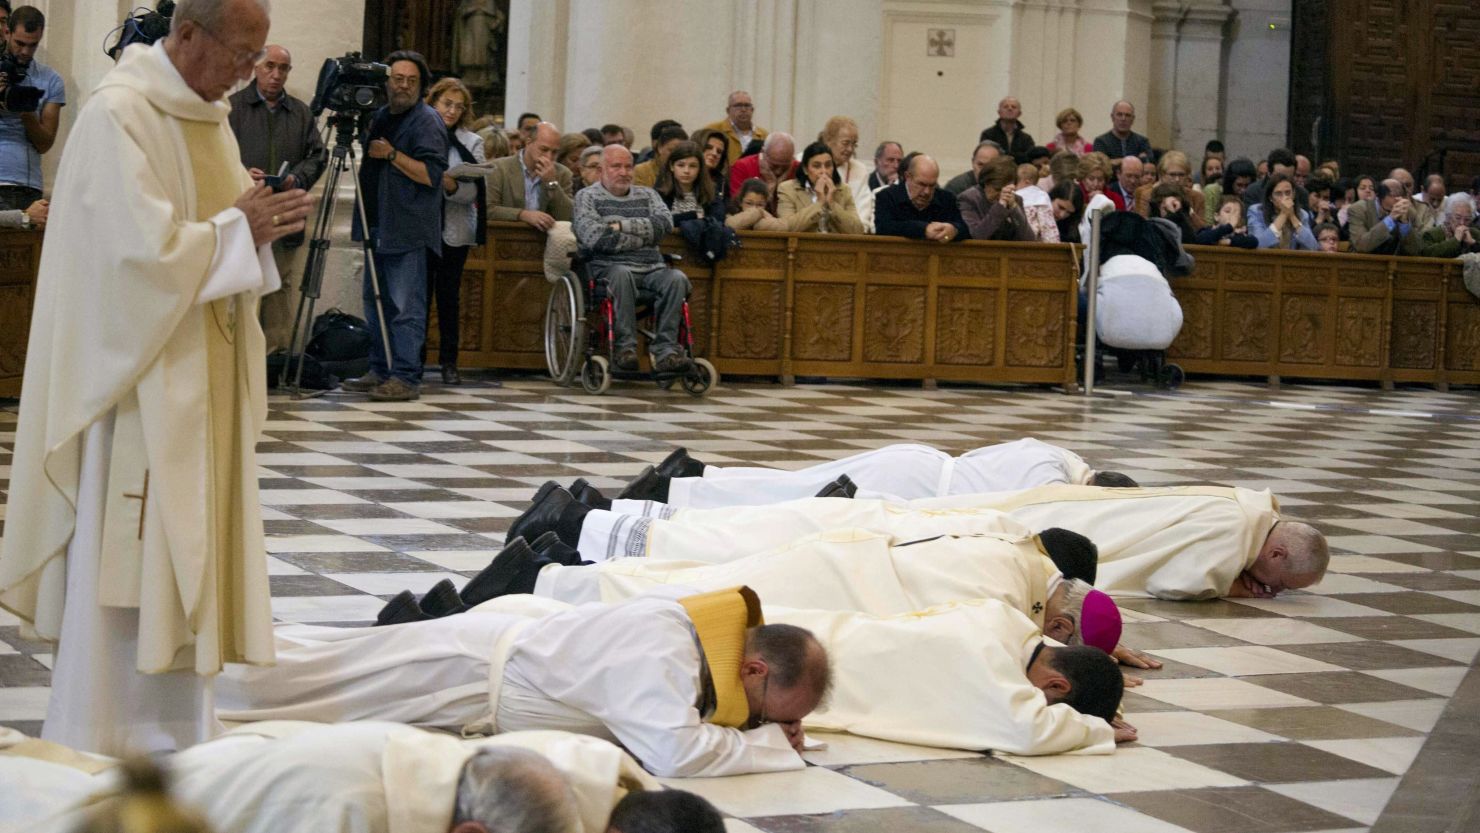 Granada's Archbishop, Francisco Javier Martinez (purple skullcap) prostrates in front of cathedral's high altar to ask forgiveness for 'the scandals.'